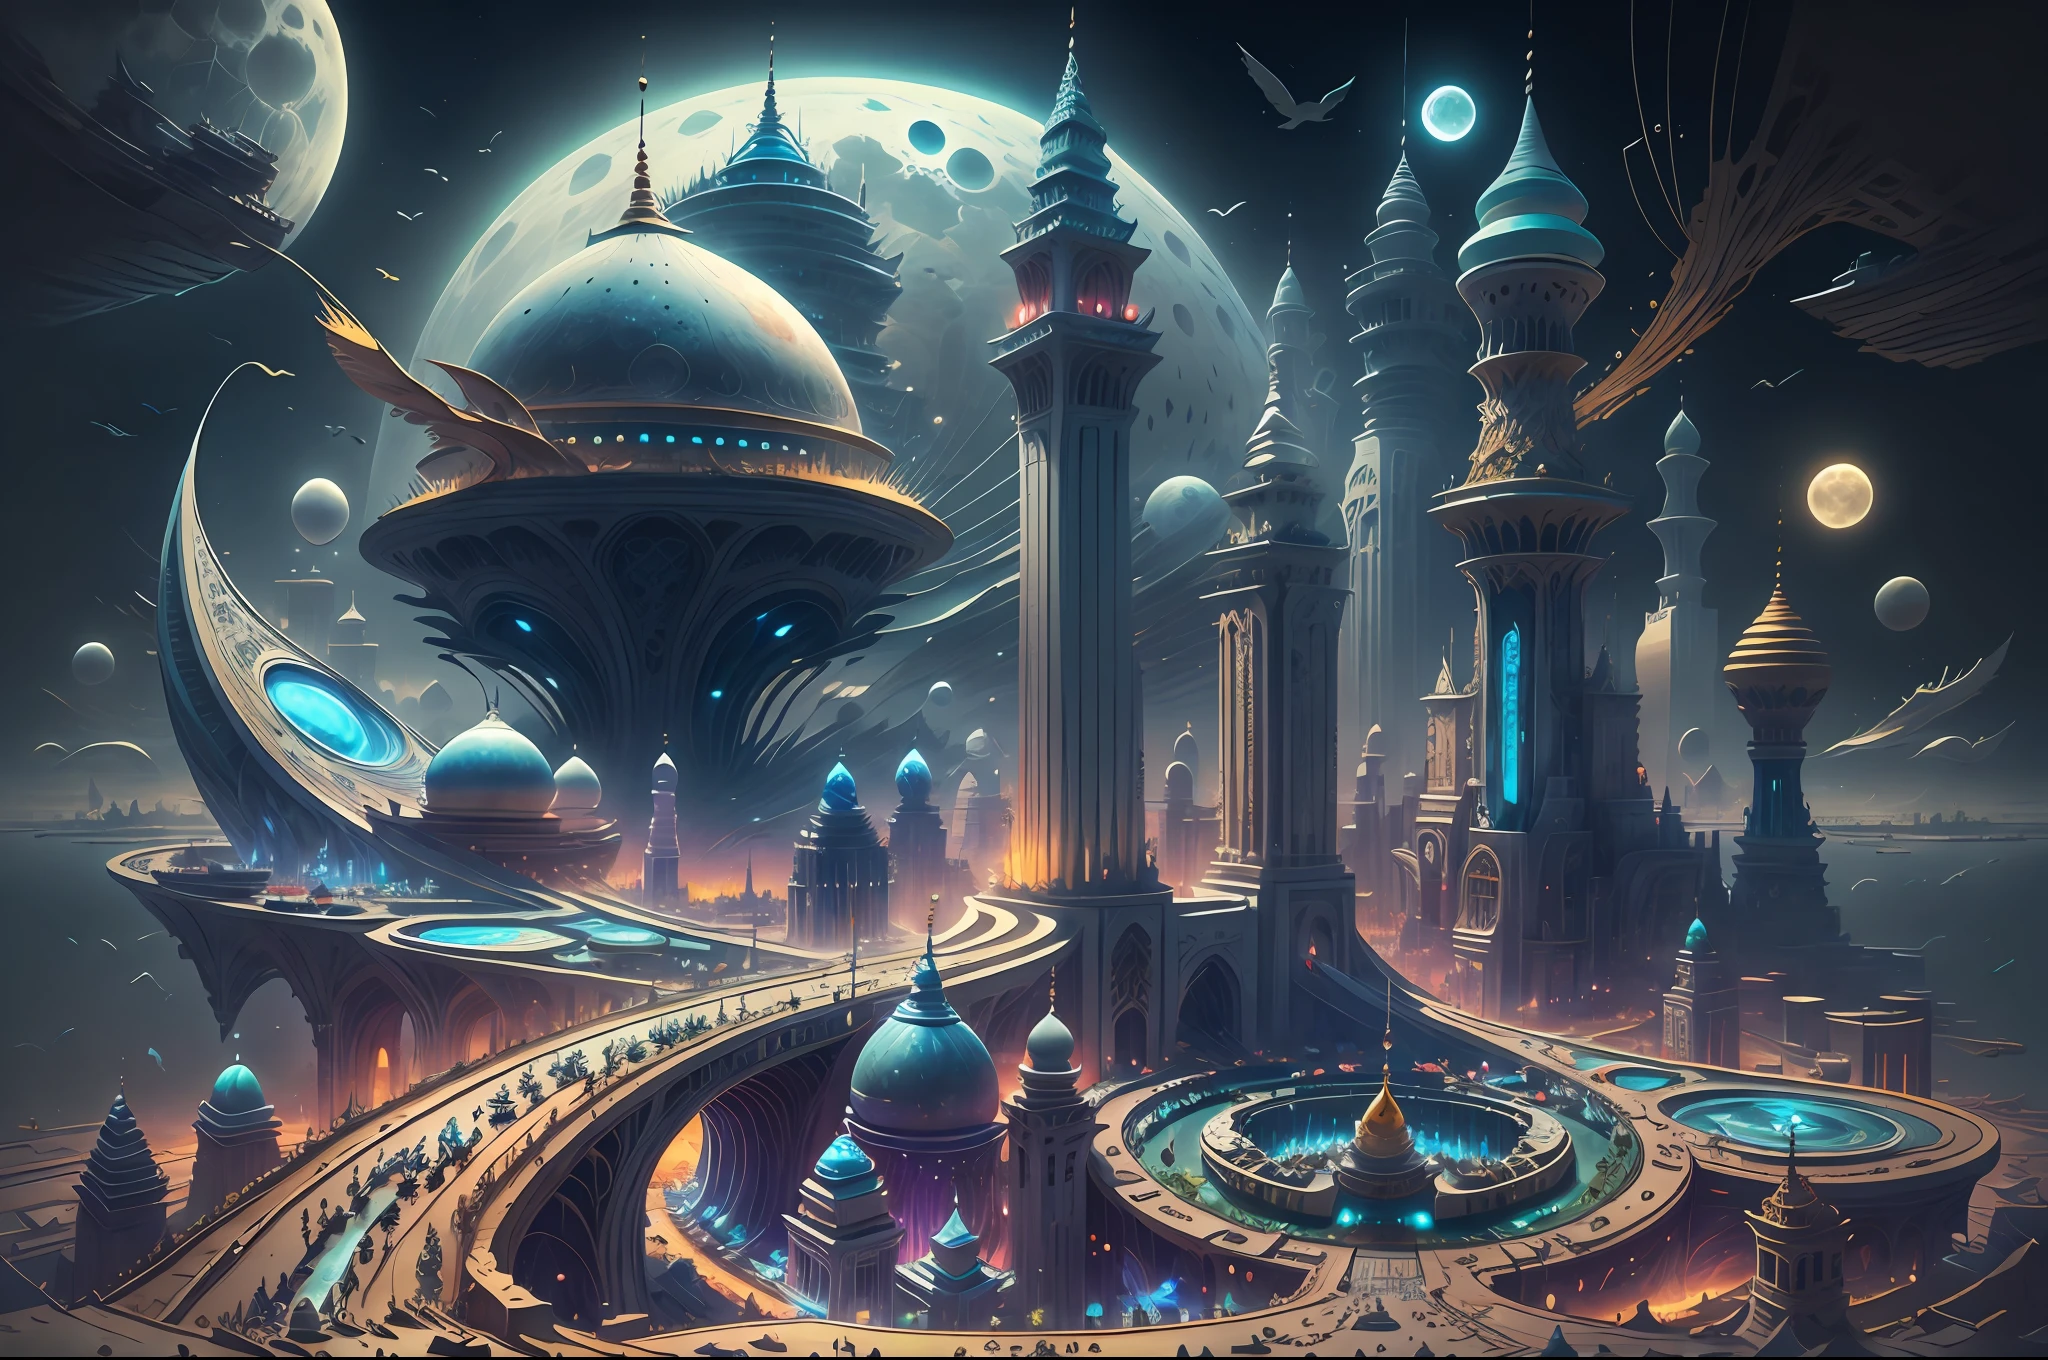 there is a large futuristic masterpiece Arabian palace in the middle of a futuristic arabian city with a moon, in fantasy sci - fi city, sci-fi fantasy wallpaper, masterpiece Quranic art cityscape, epic   Quranic art sci fi illustration, huge futuristic Quranic art city, fantasy scifi, sci-fi fantasy desktop wallpaper, Quranic art city background, in front of a fantasy city, fantasy city, in a castle on an alien planet with masterpiece Quranic art